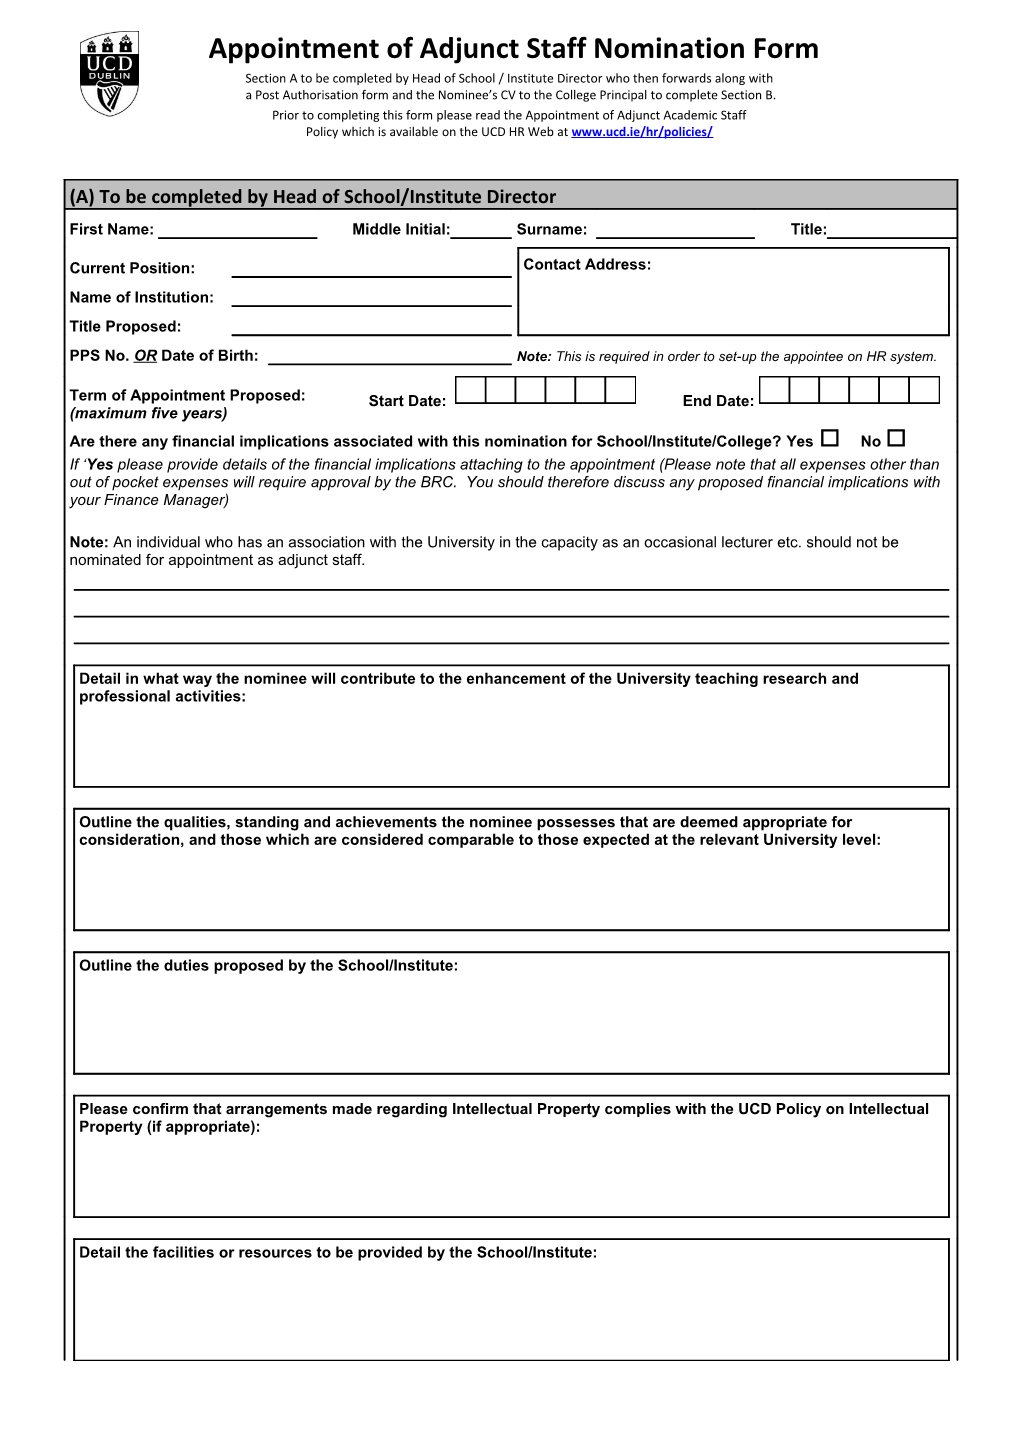 Appointment of Adjunct Staff Nomination Form